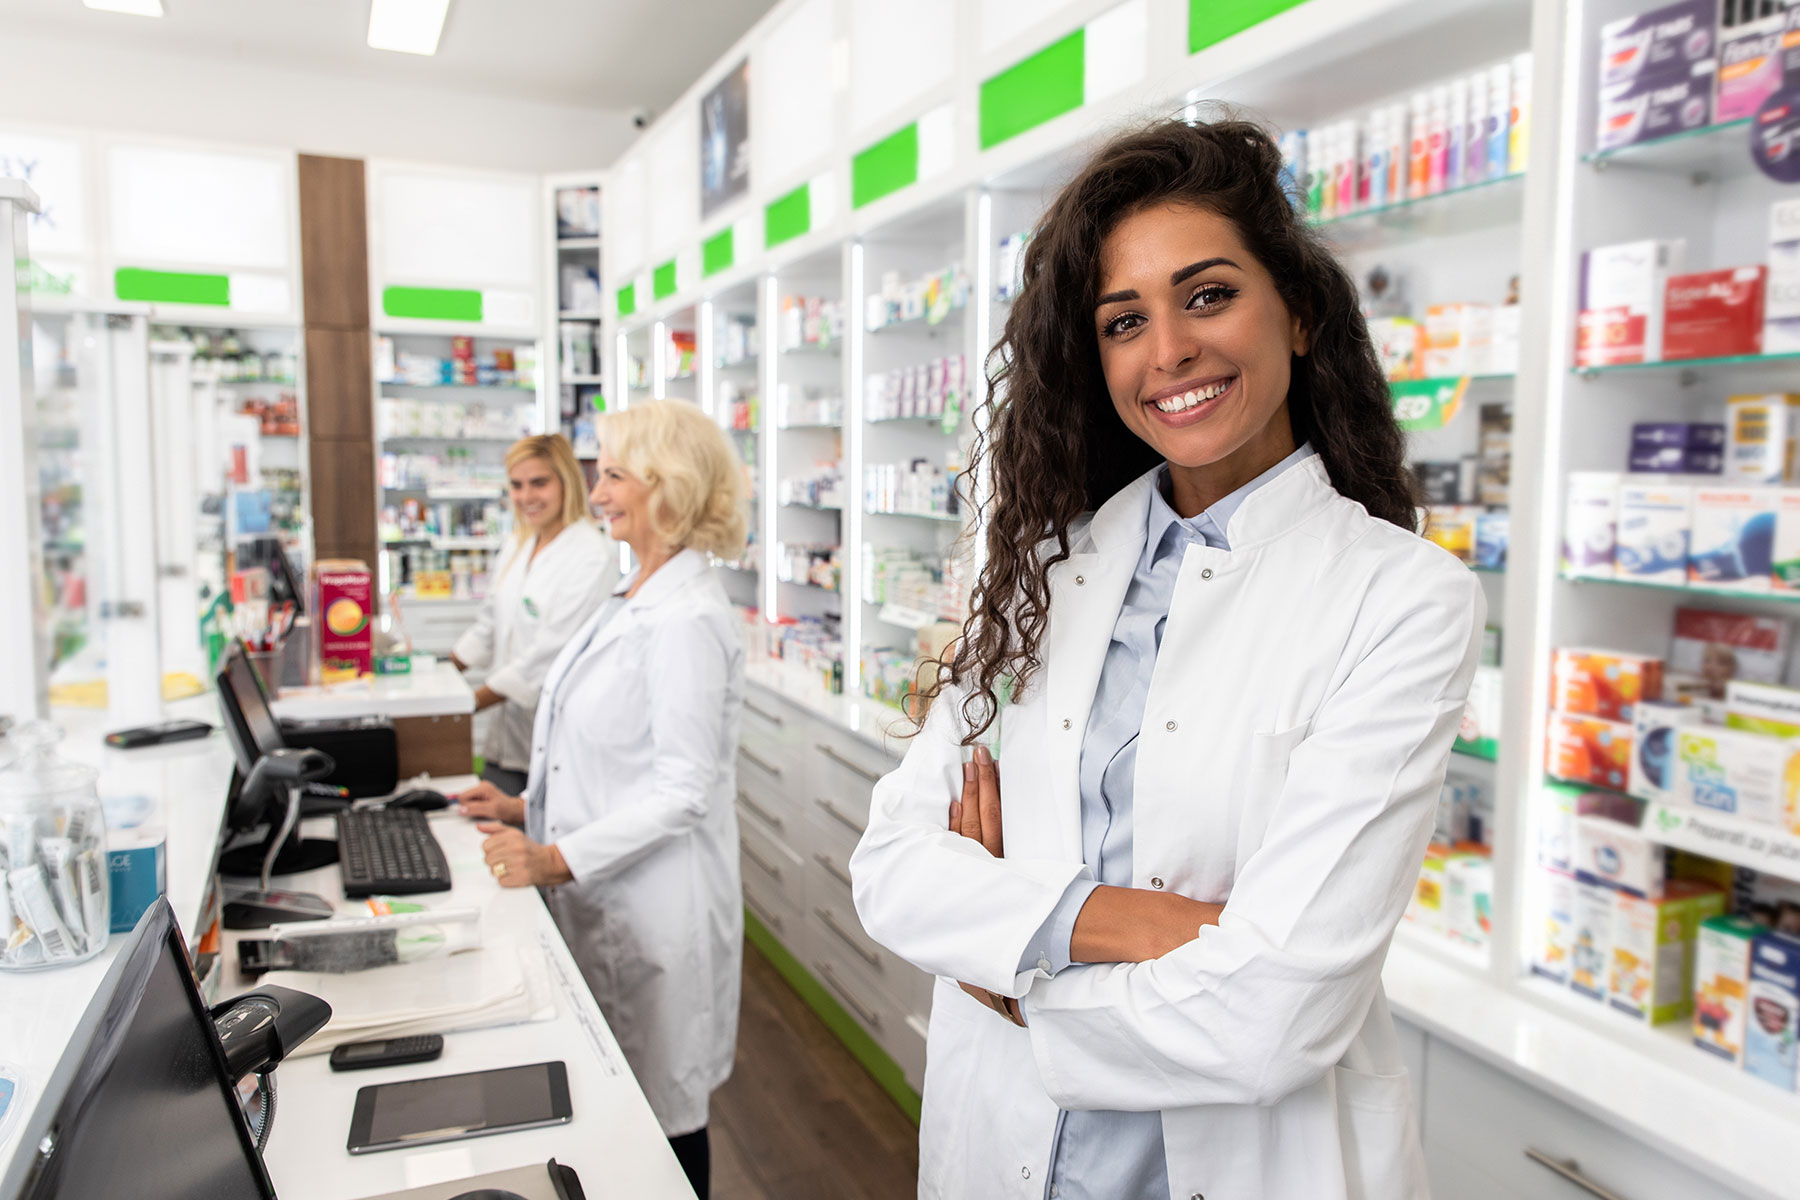 a woman starts her new job as a pharmacist after meeting all the requirements